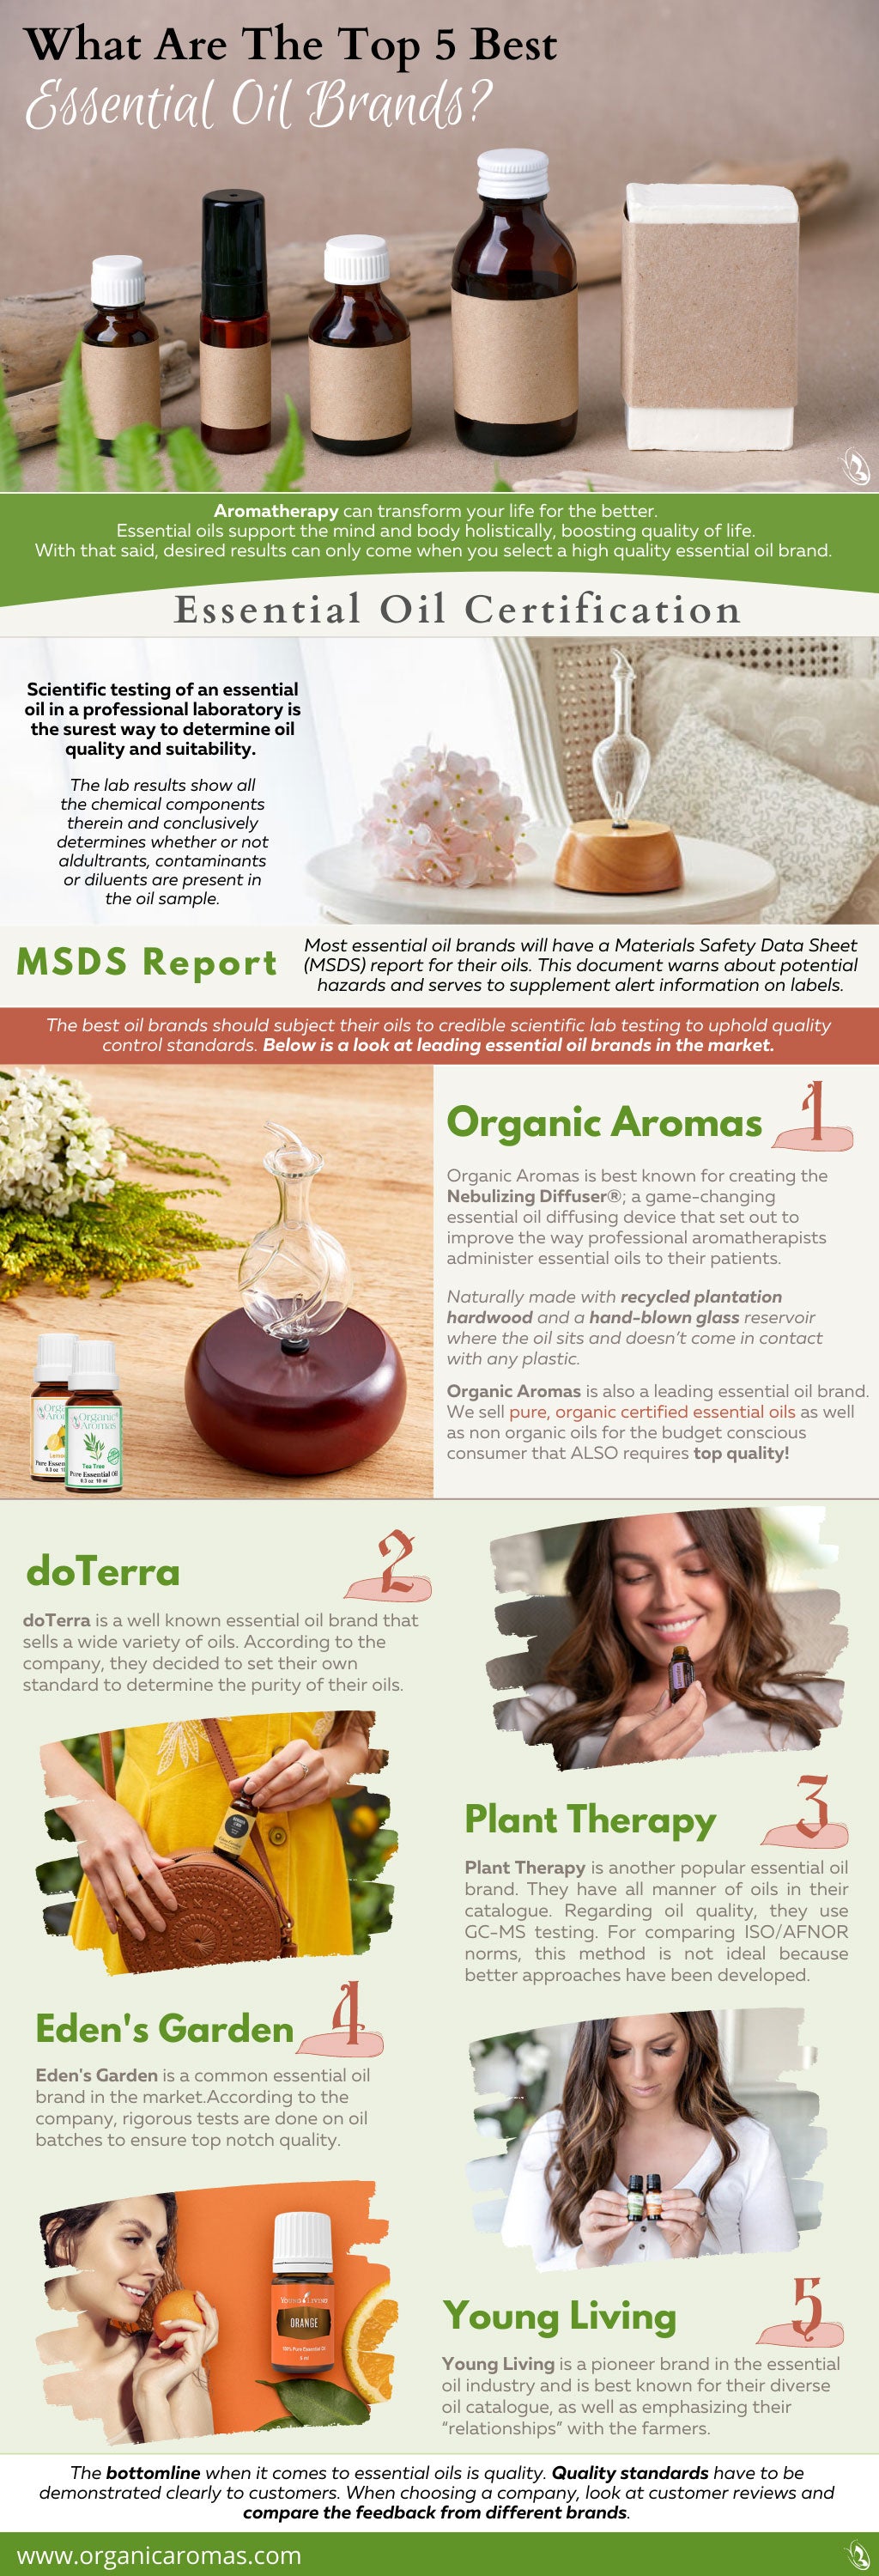 9 Best Essential Oil Brands 2022 for Aromatherapy Benefits